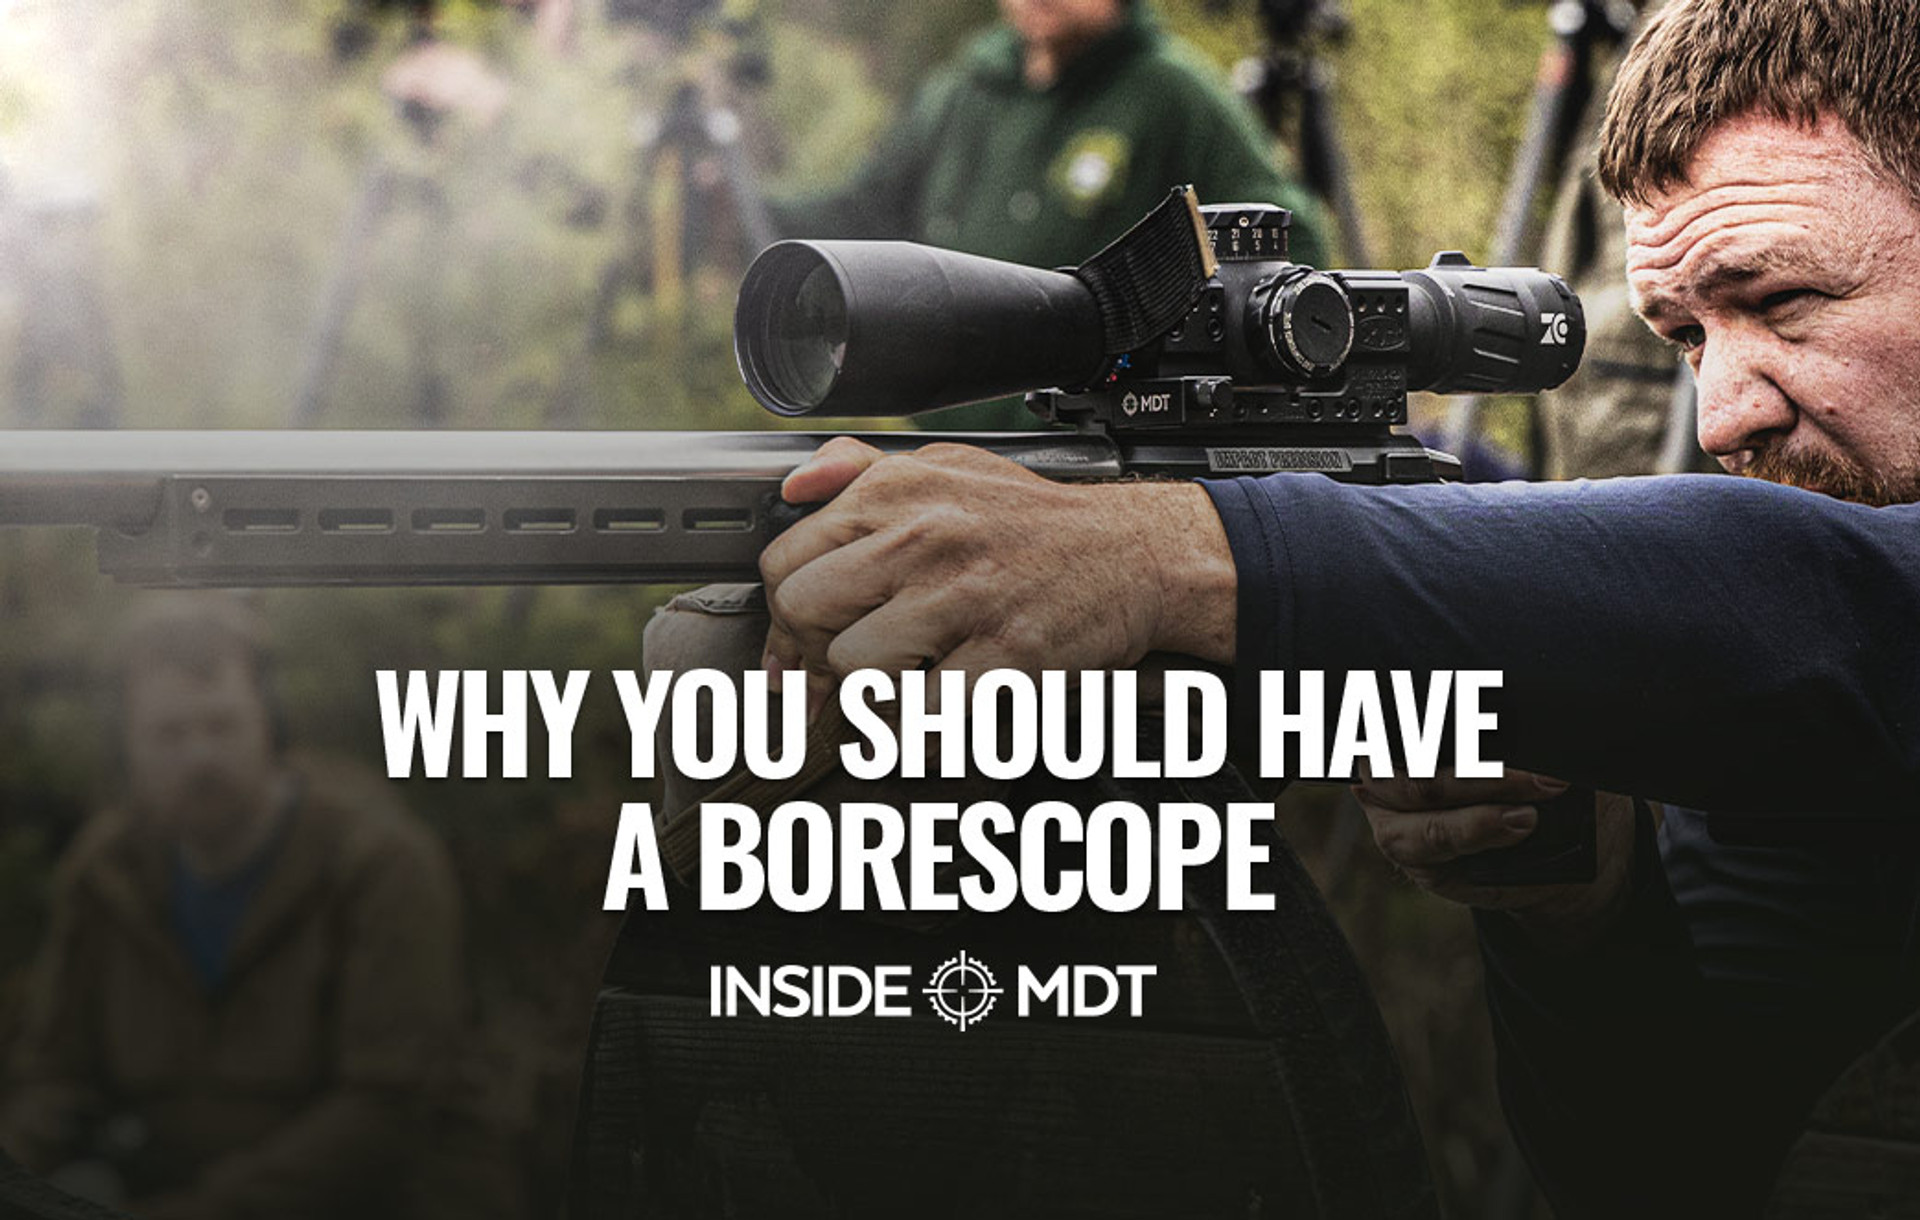 Why You Should Have a Borescope - Inside MGT